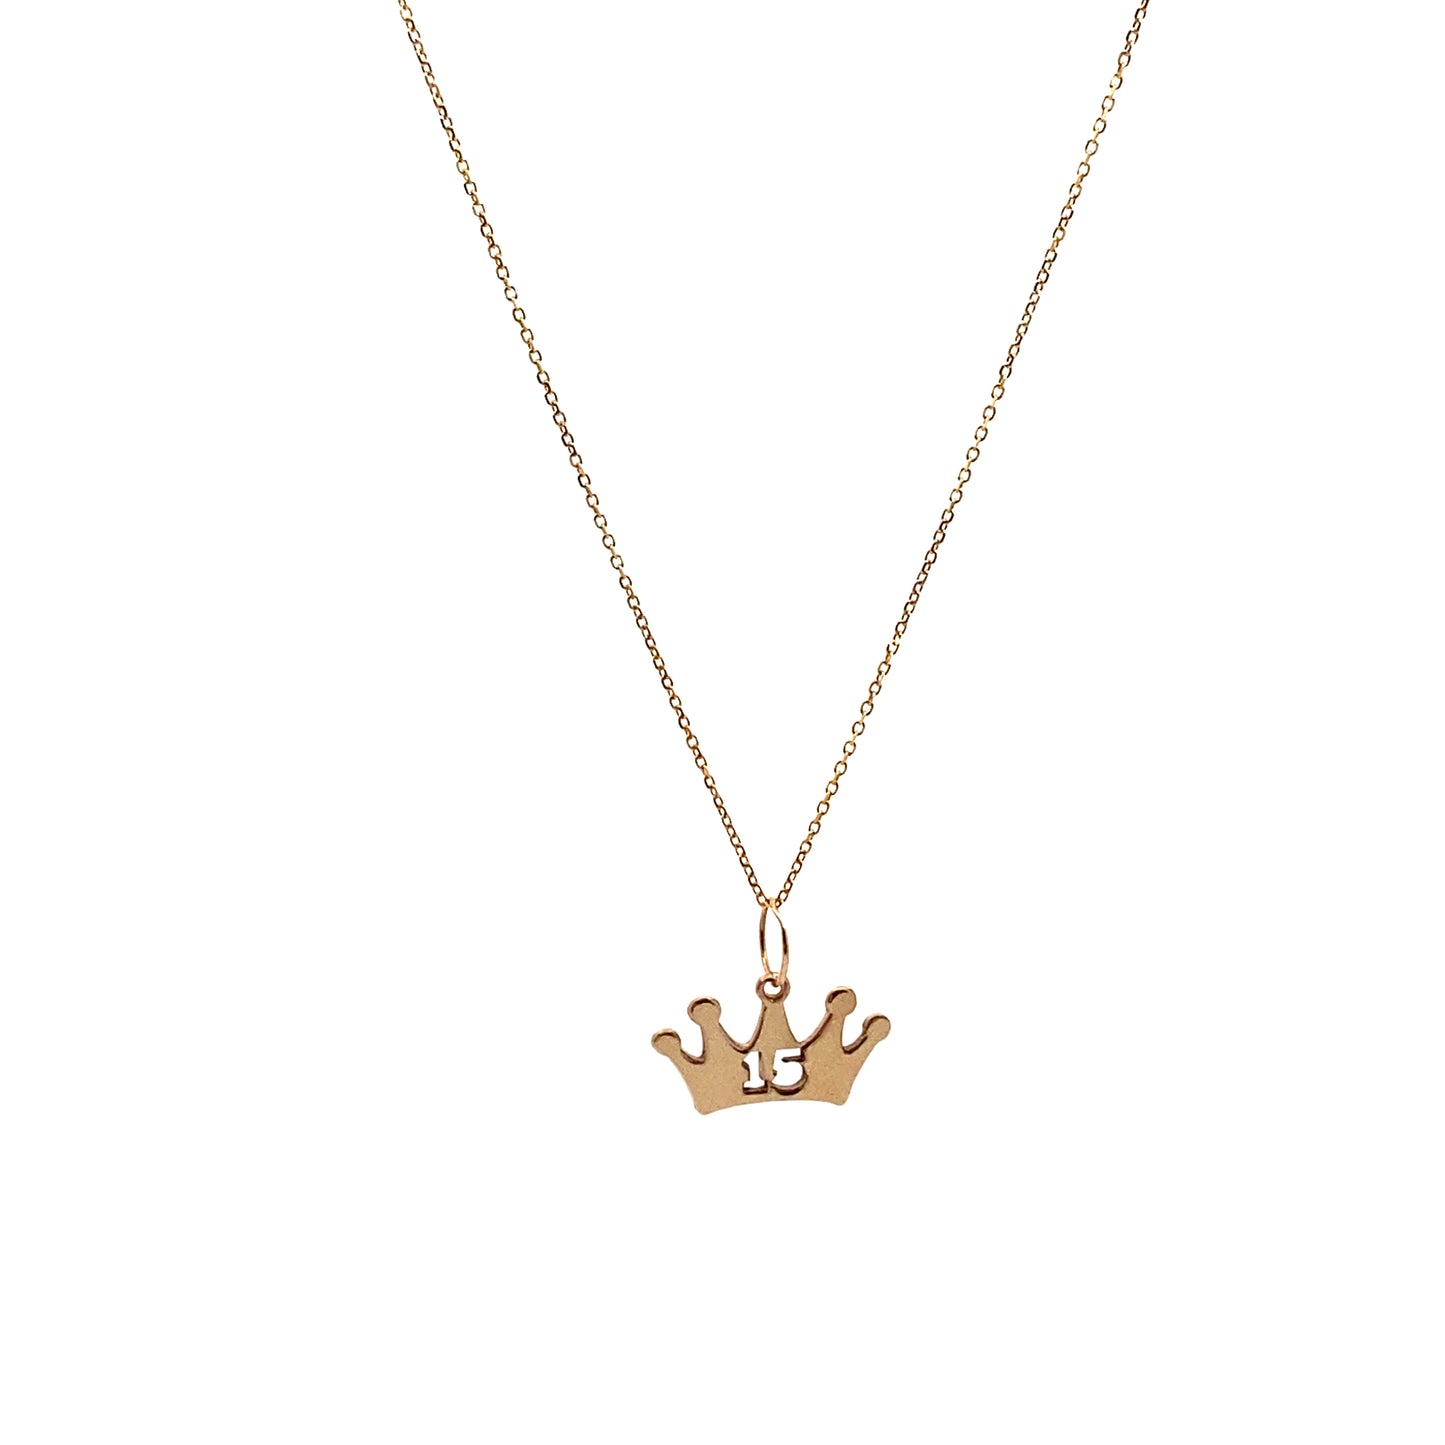 14K Gold Custom Crown Pendant with Number 15 | Luby Gold Collection | Luby 